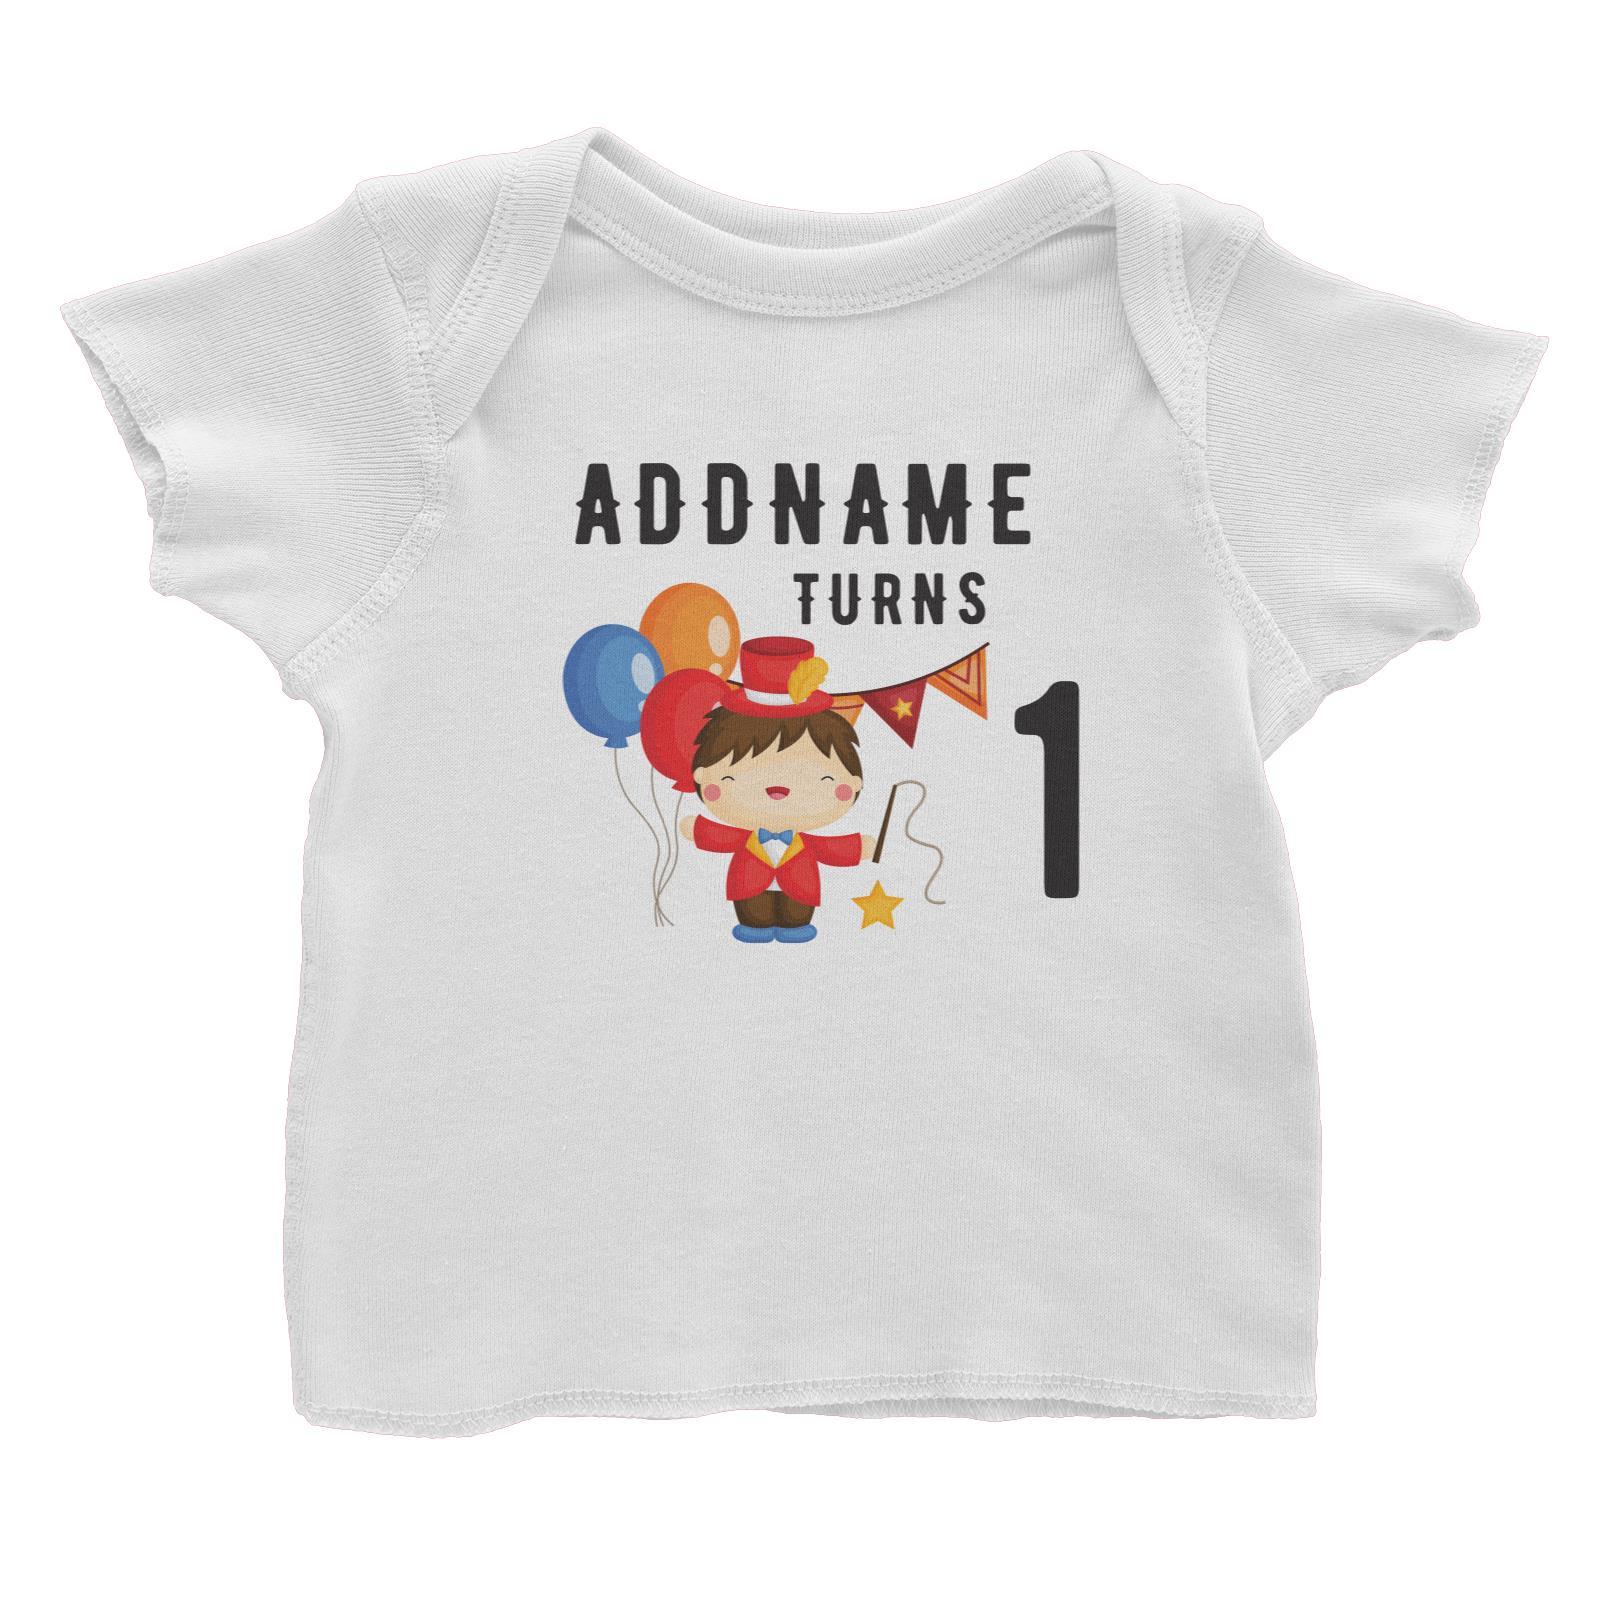 Birthday Circus Happy Boy Leader of Performance Addname Turns 1 Baby T-Shirt